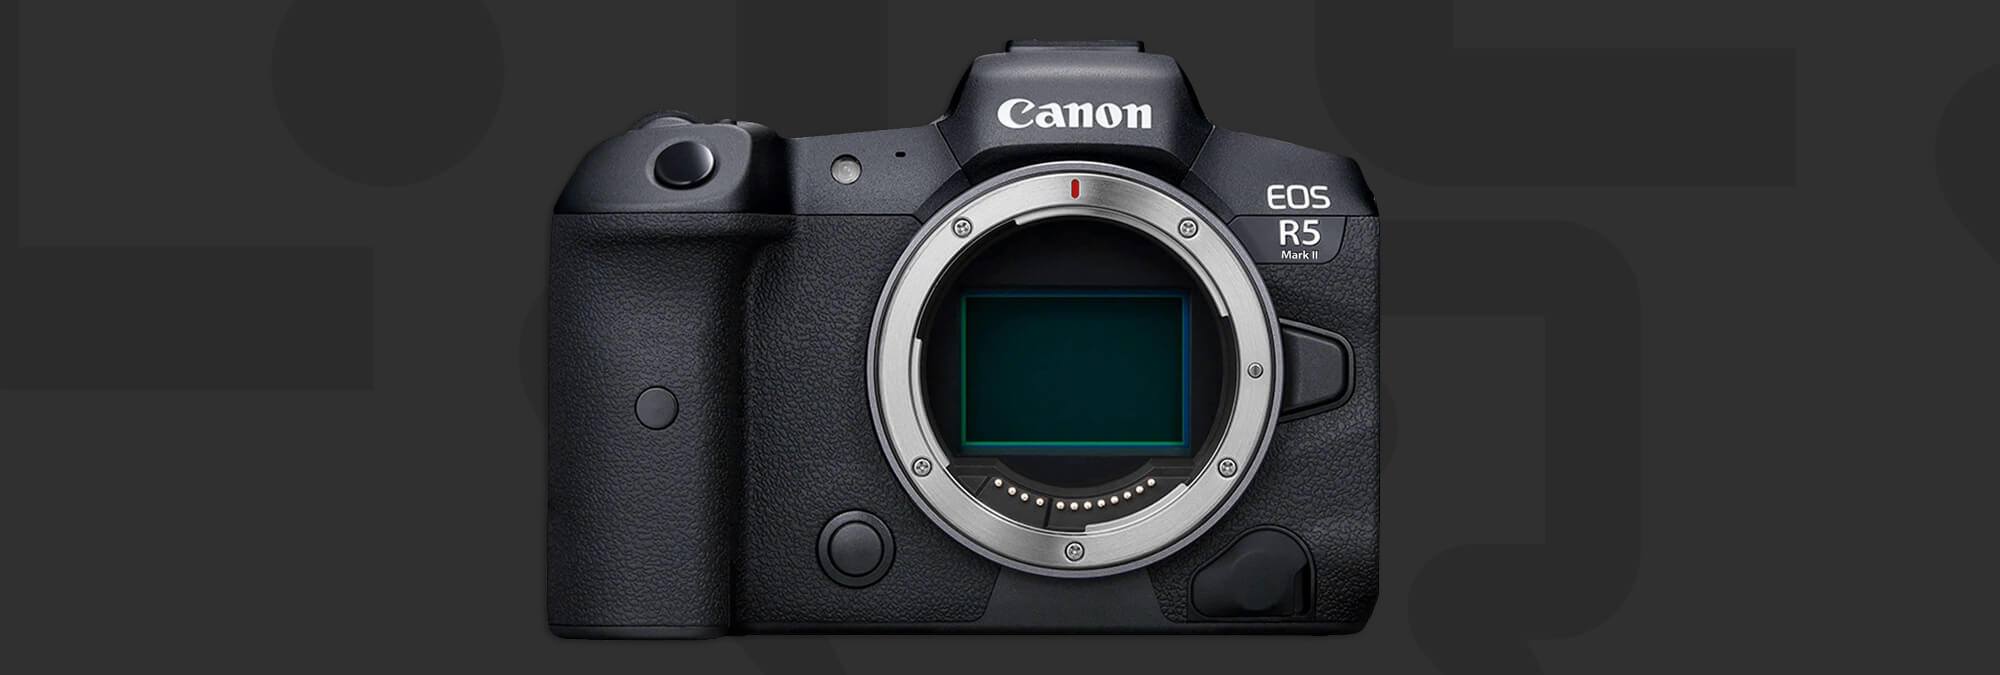 Beginner's guide to customizing the Canon EOS R5 for photography